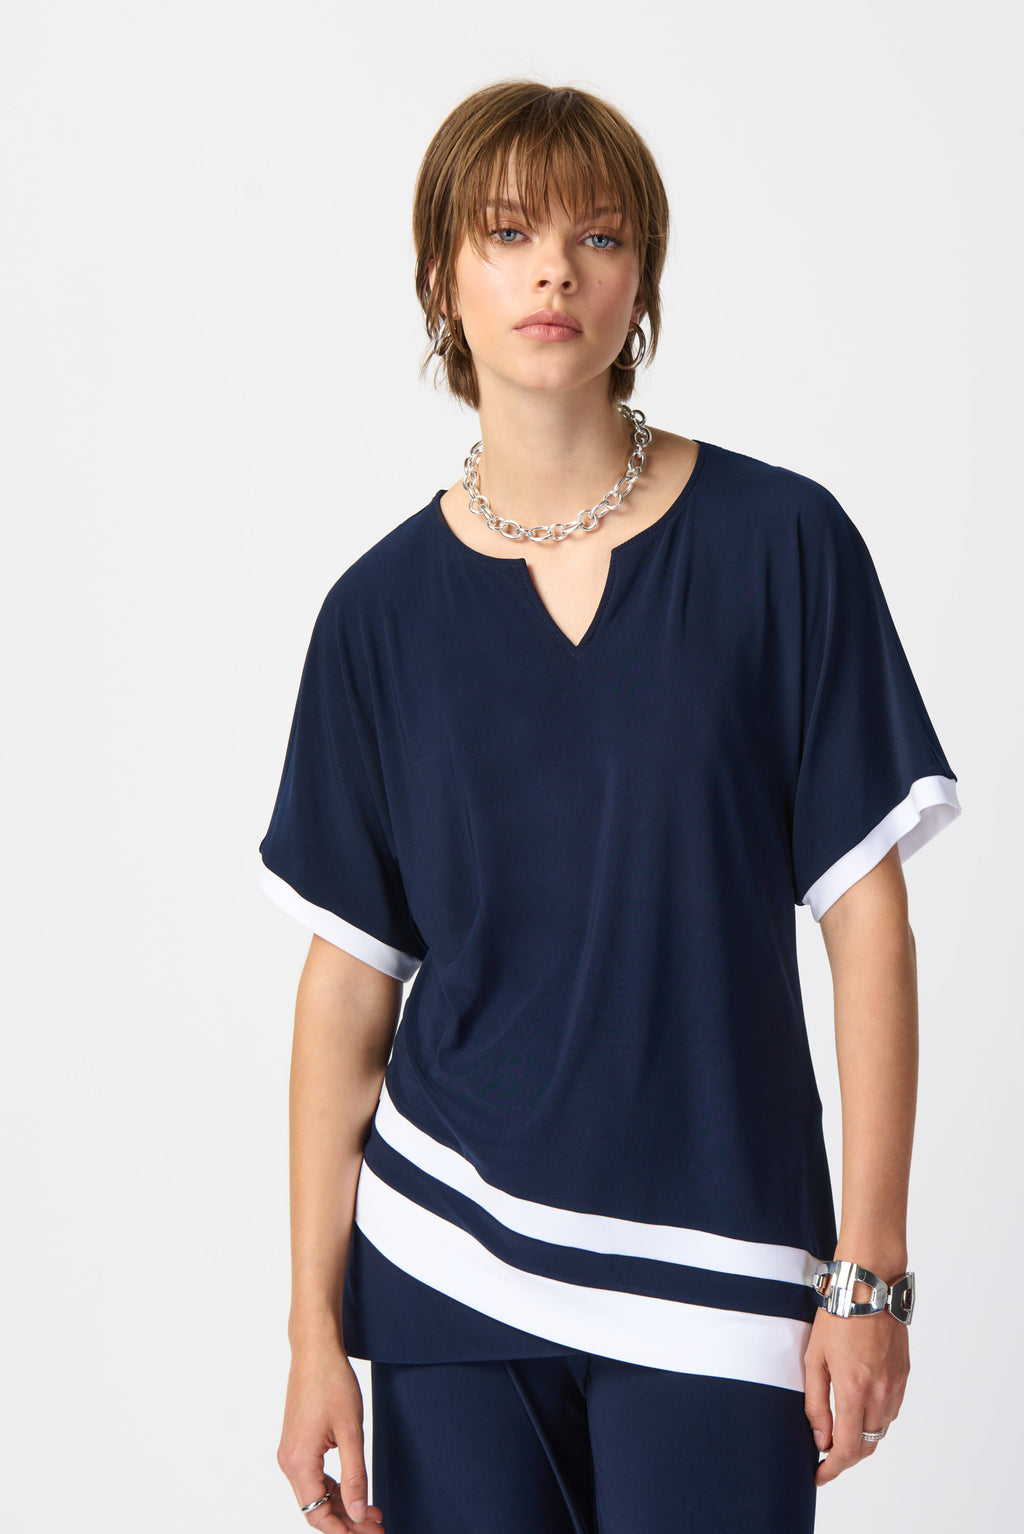  Add a touch of sophistication to your wardrobe with this unique colour-block top. This short-sleeve design features a flattering slit neckline that adds elegance and versatility to the overall look.